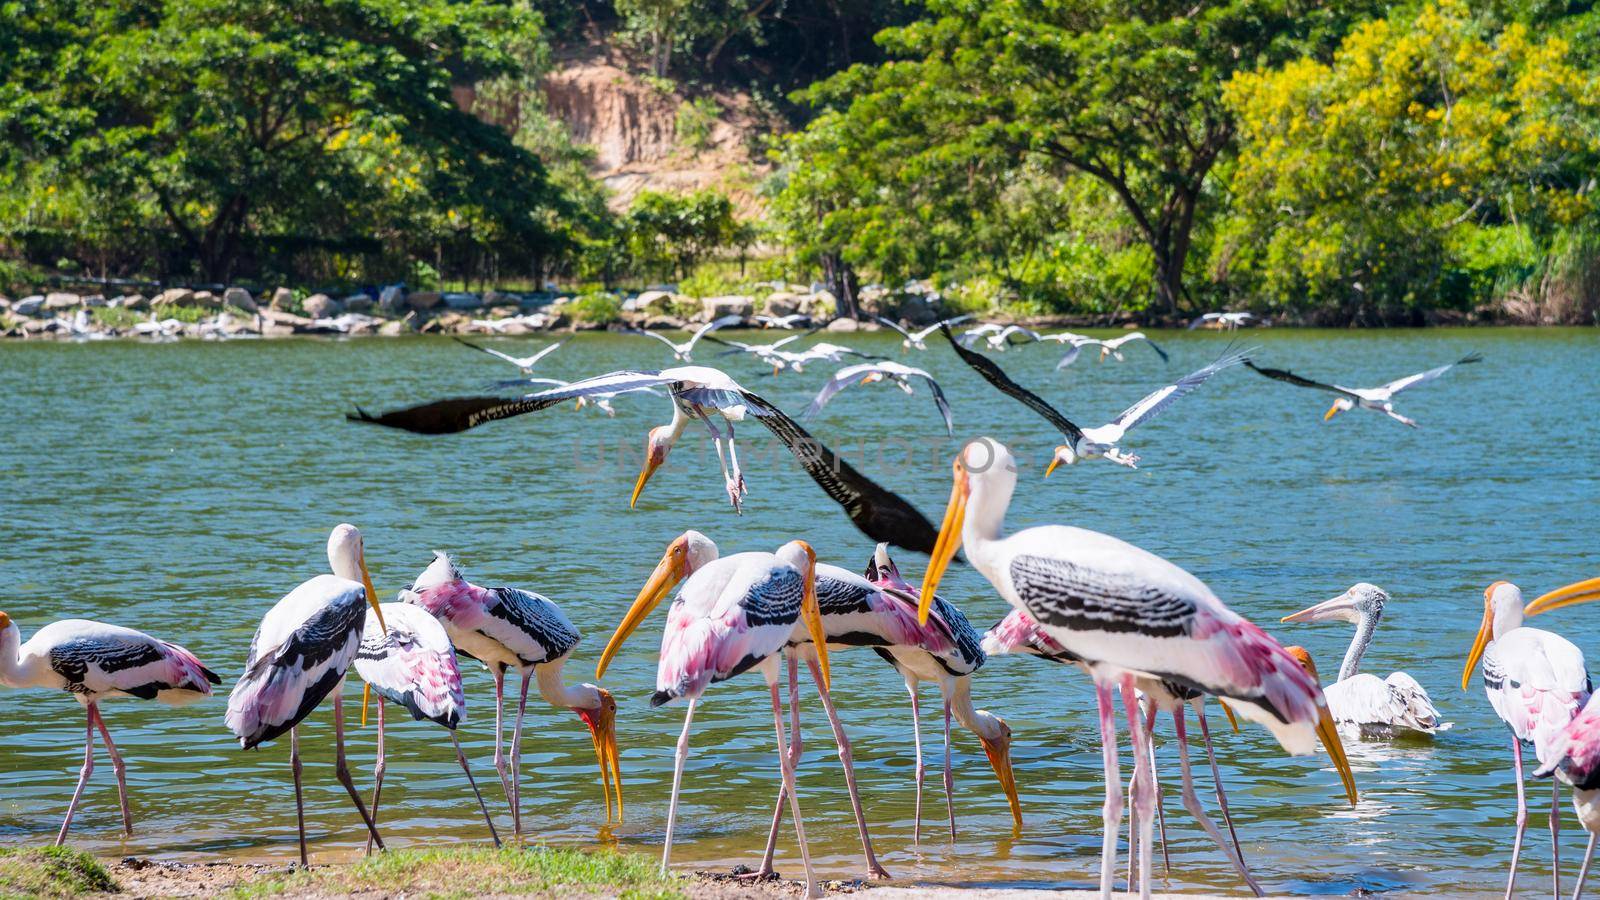 Group of Painted Stork or Mycteria Leucocephala, Flock of big bird foraging on the waterfront and flying at the lake, Beautiful wildlife in nature tranquil tropical forest of Thailand, 16:9 widescreen